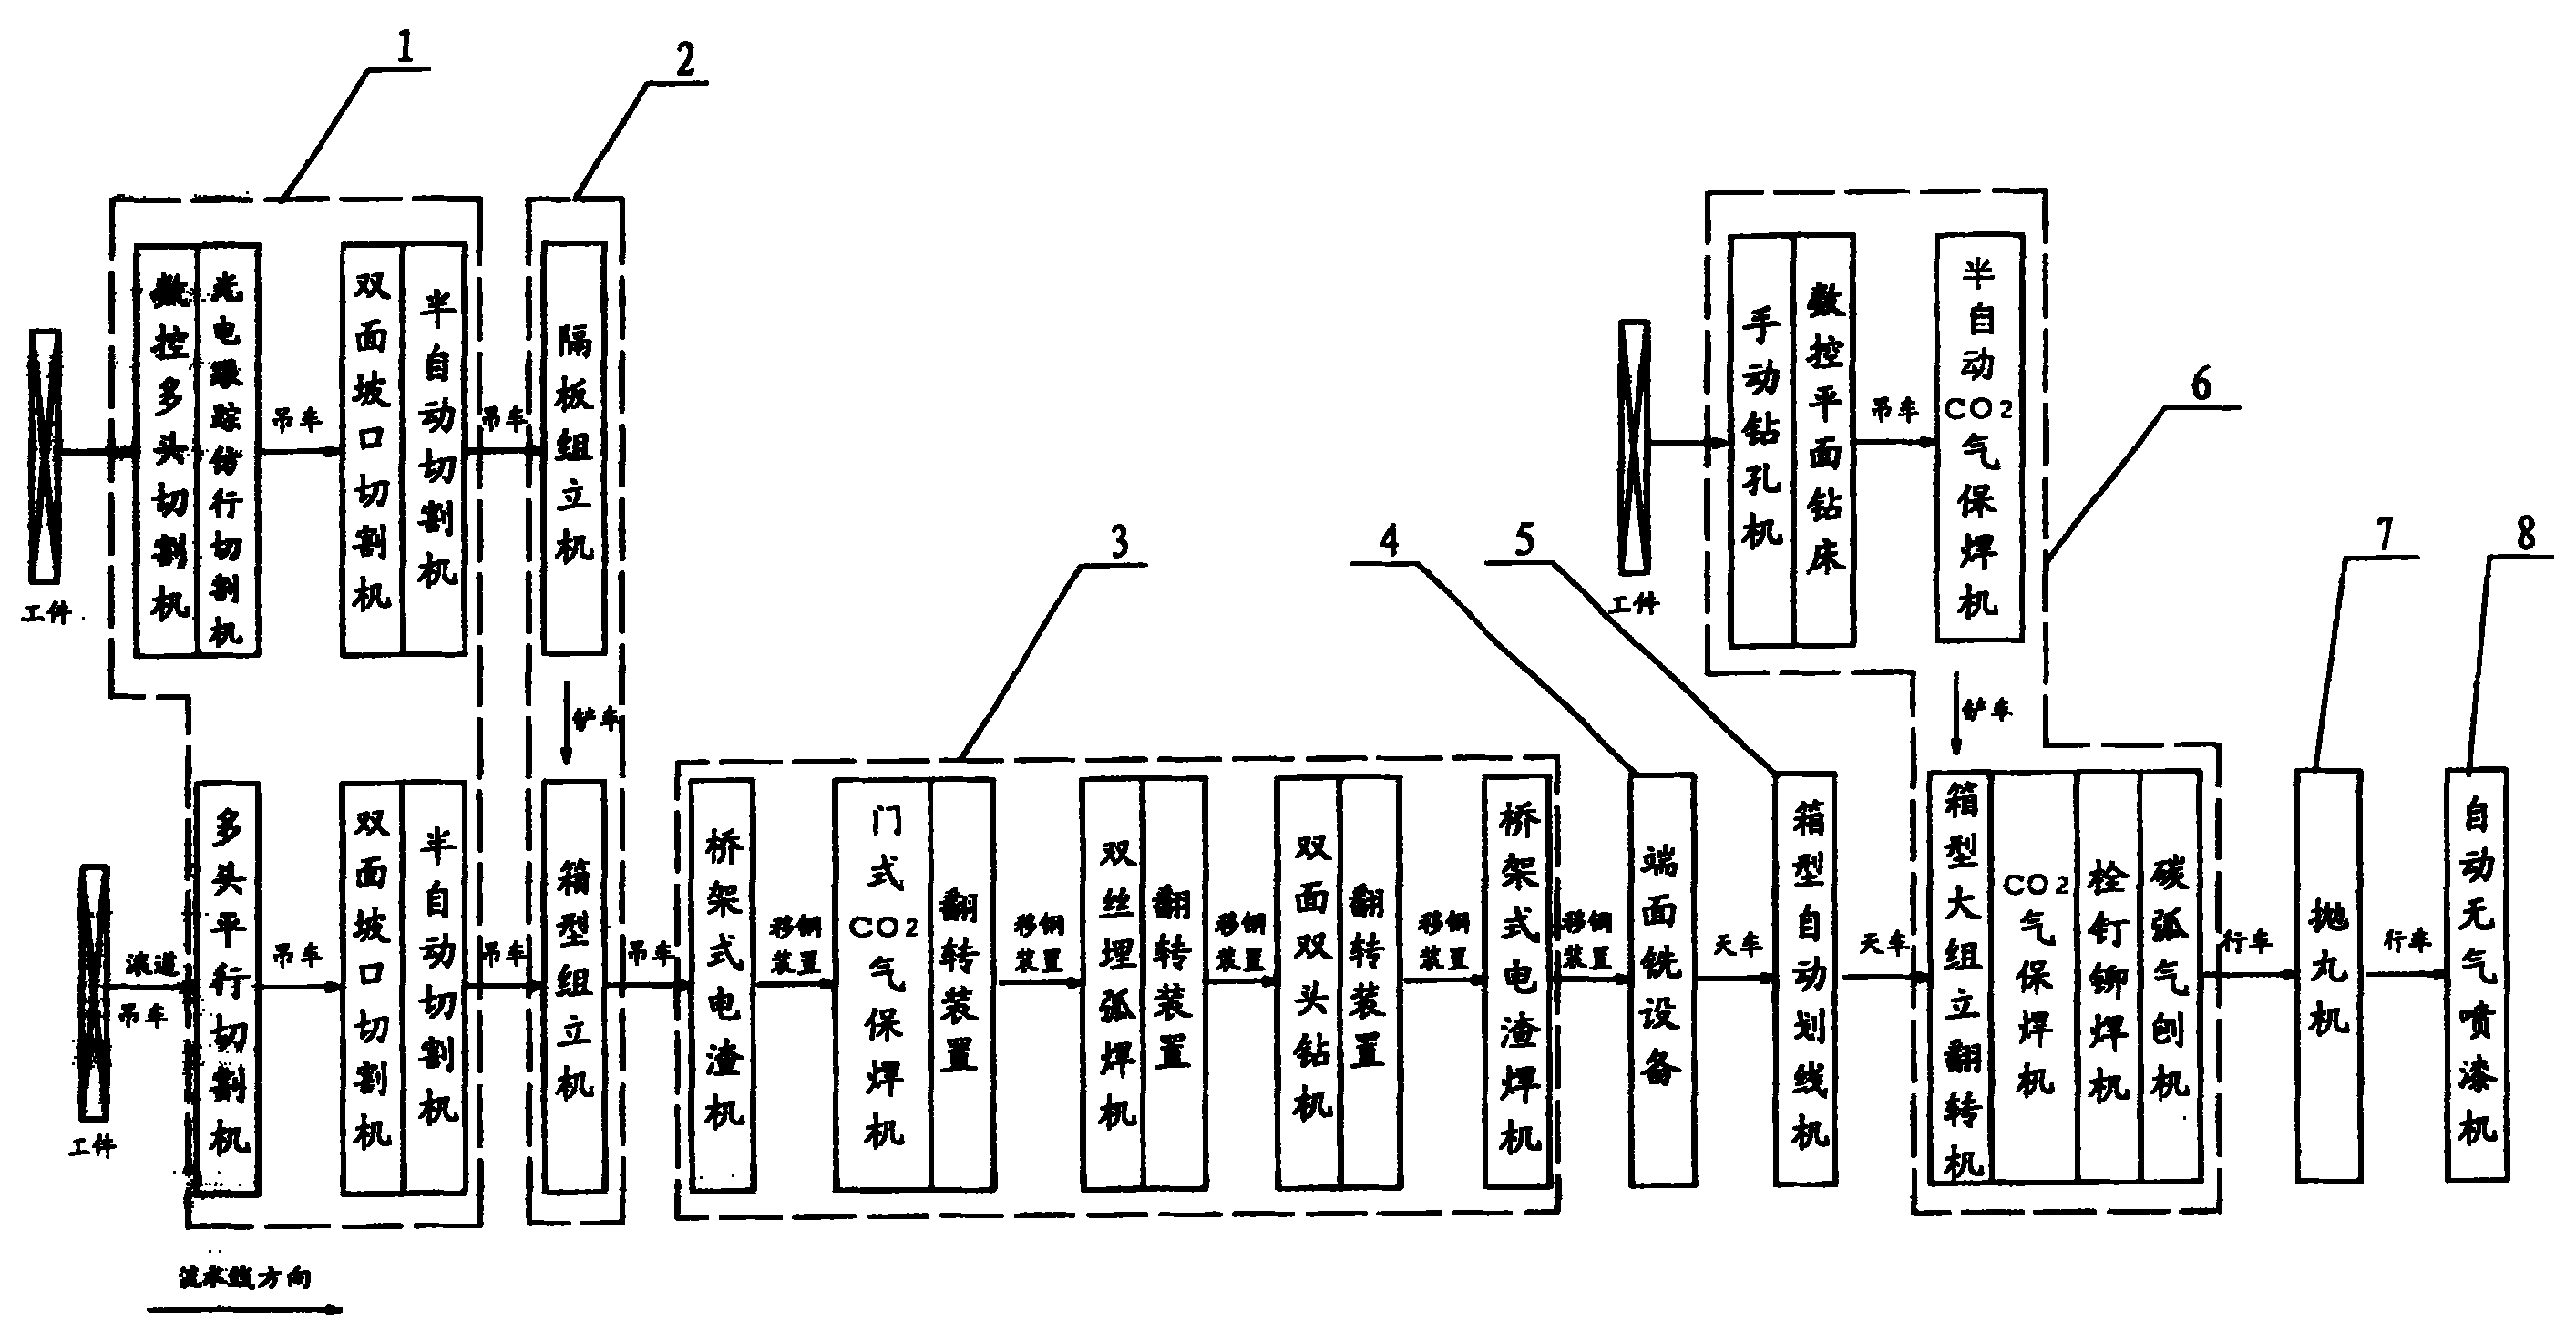 Lateral layout production flow line of box type steel structure element